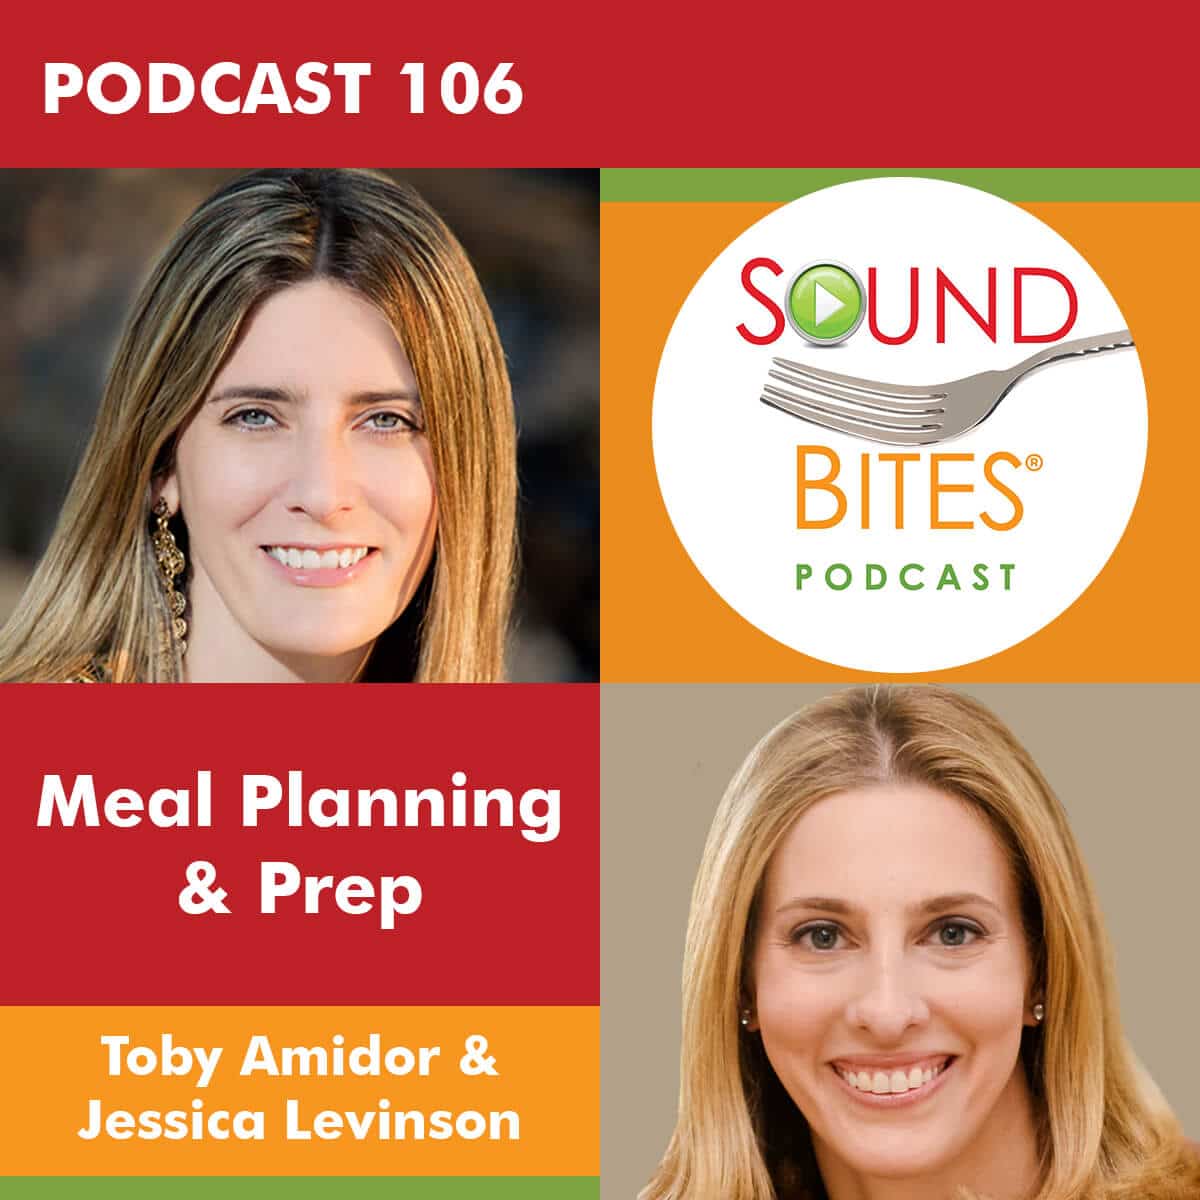 Toby Amidor & Jessica Levinson Meal Planning & Prep